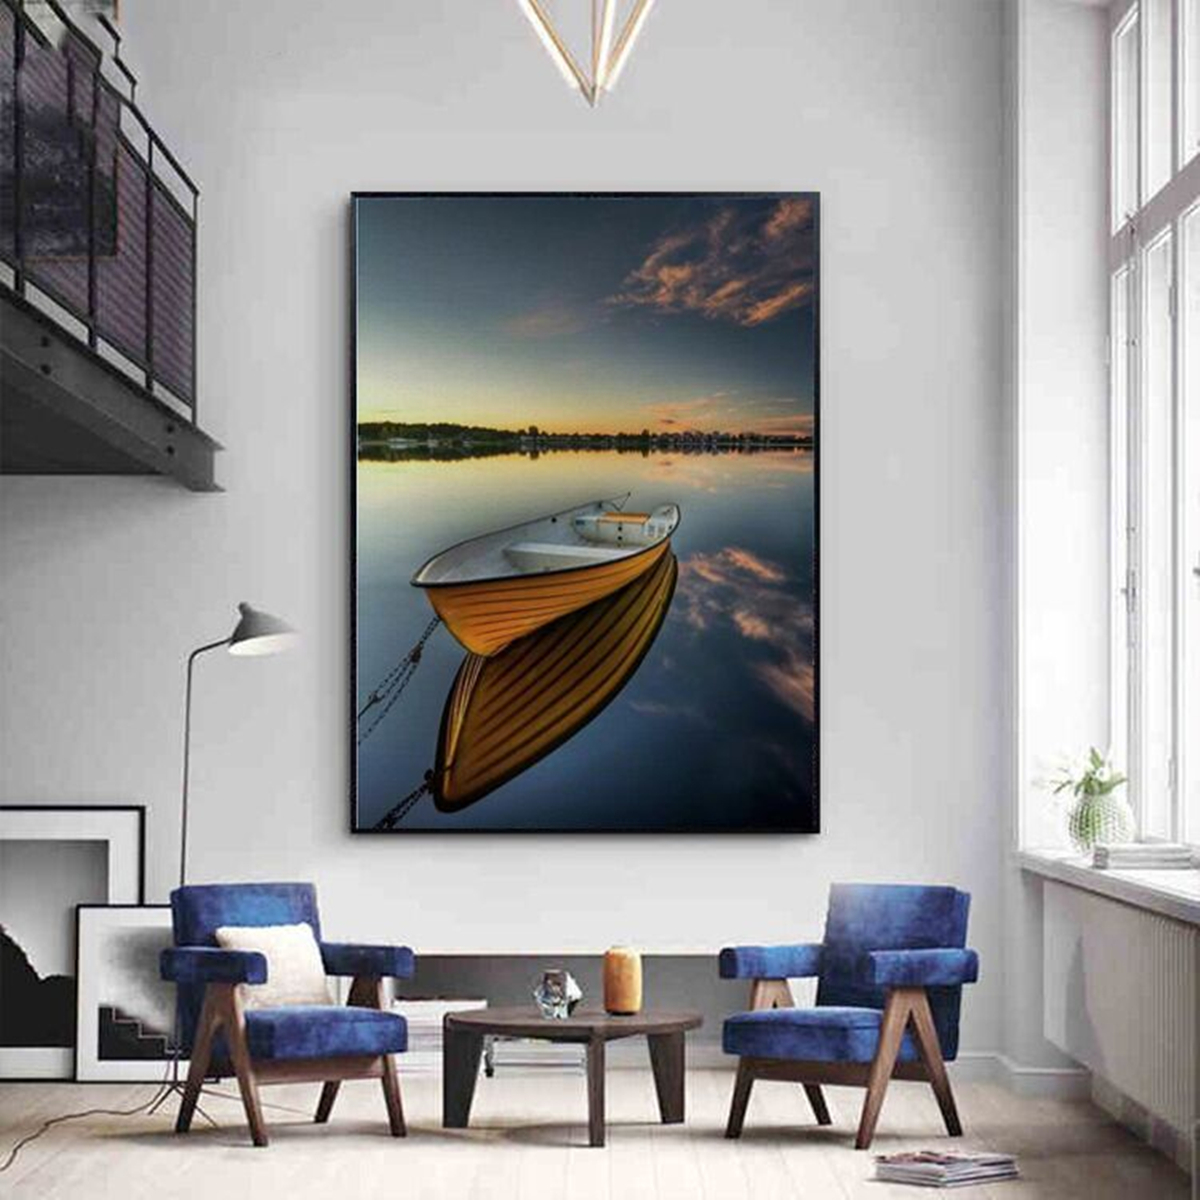 40X30CM-Sea-Boat-Modern-Art-Painting-Canvas-Home-Wall-Decoration-No-Frame-1118208